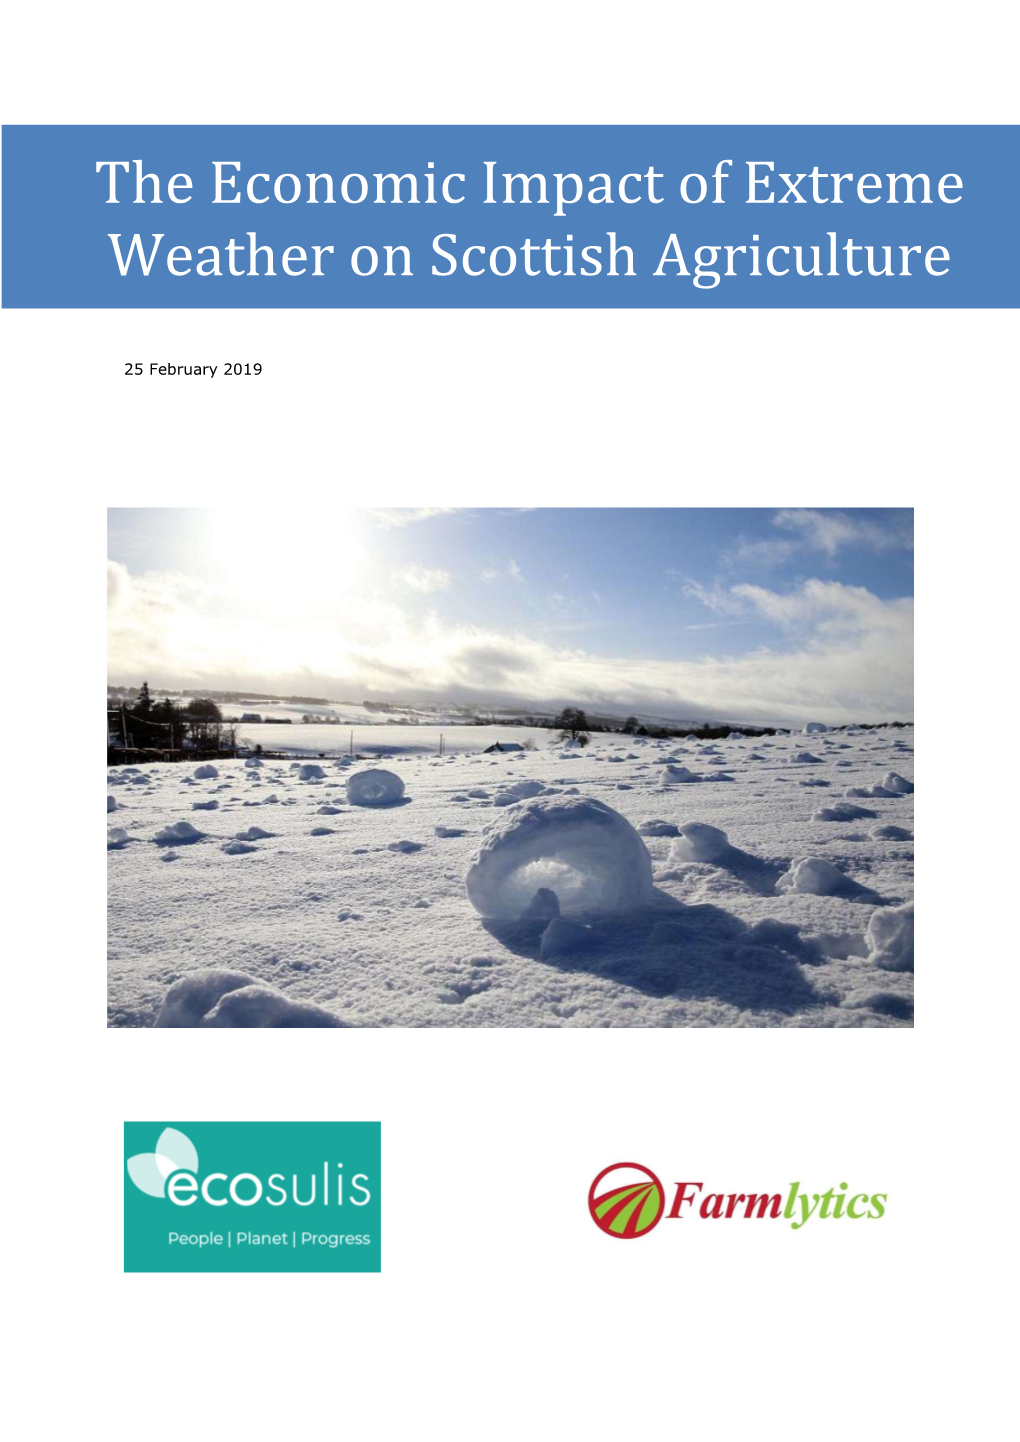 The Economic Impact of Extreme Weather on Scottish Agriculture